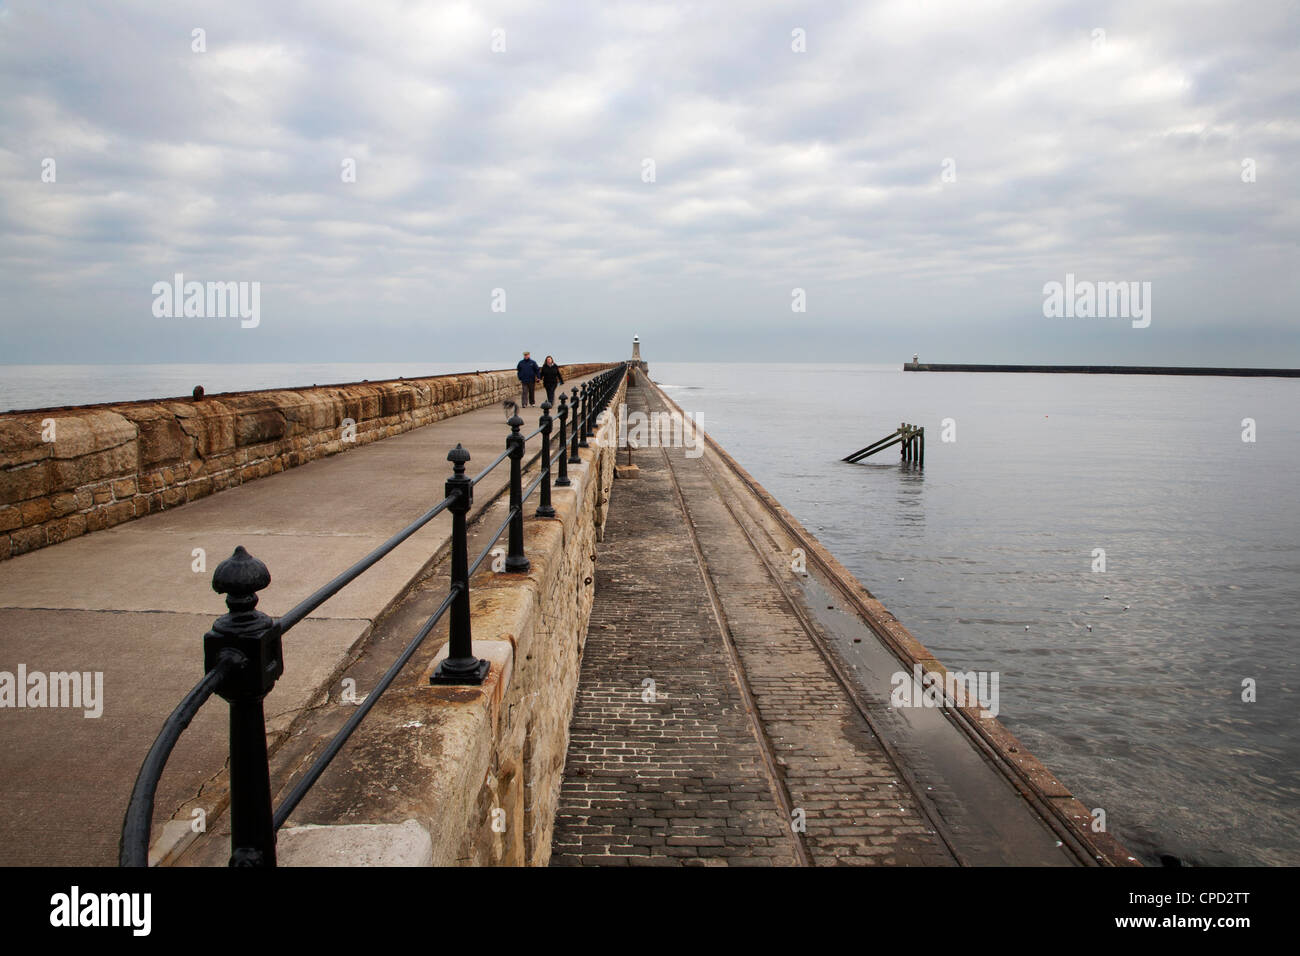 Couple walking on the North Pier at Tynemouth, North Tyneside, Tyne and Wear, England, United Kingdom, Europe Stock Photo